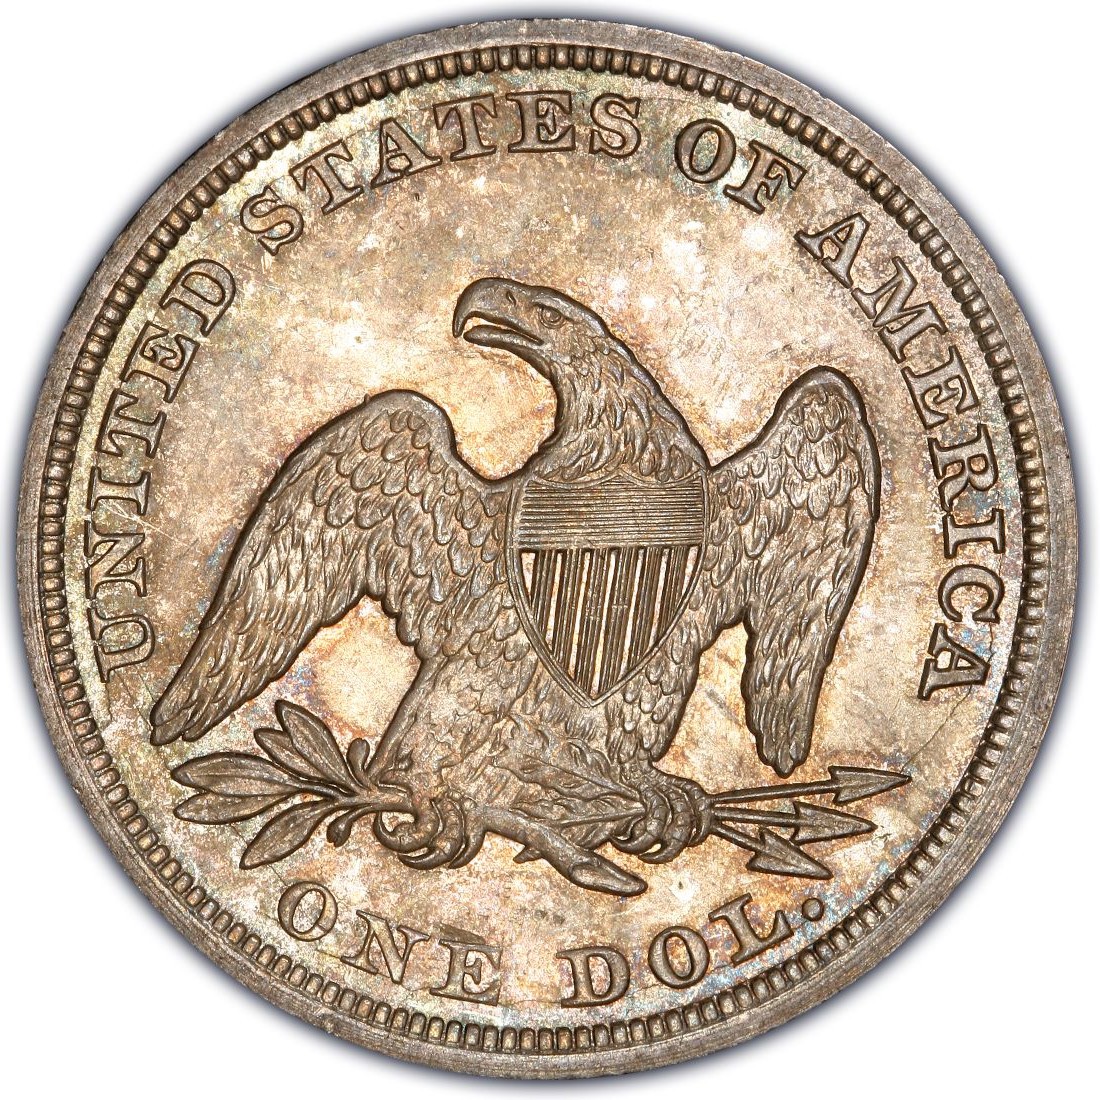 1856 Seated Liberty Silver Dollar Values and Prices - Past Sales